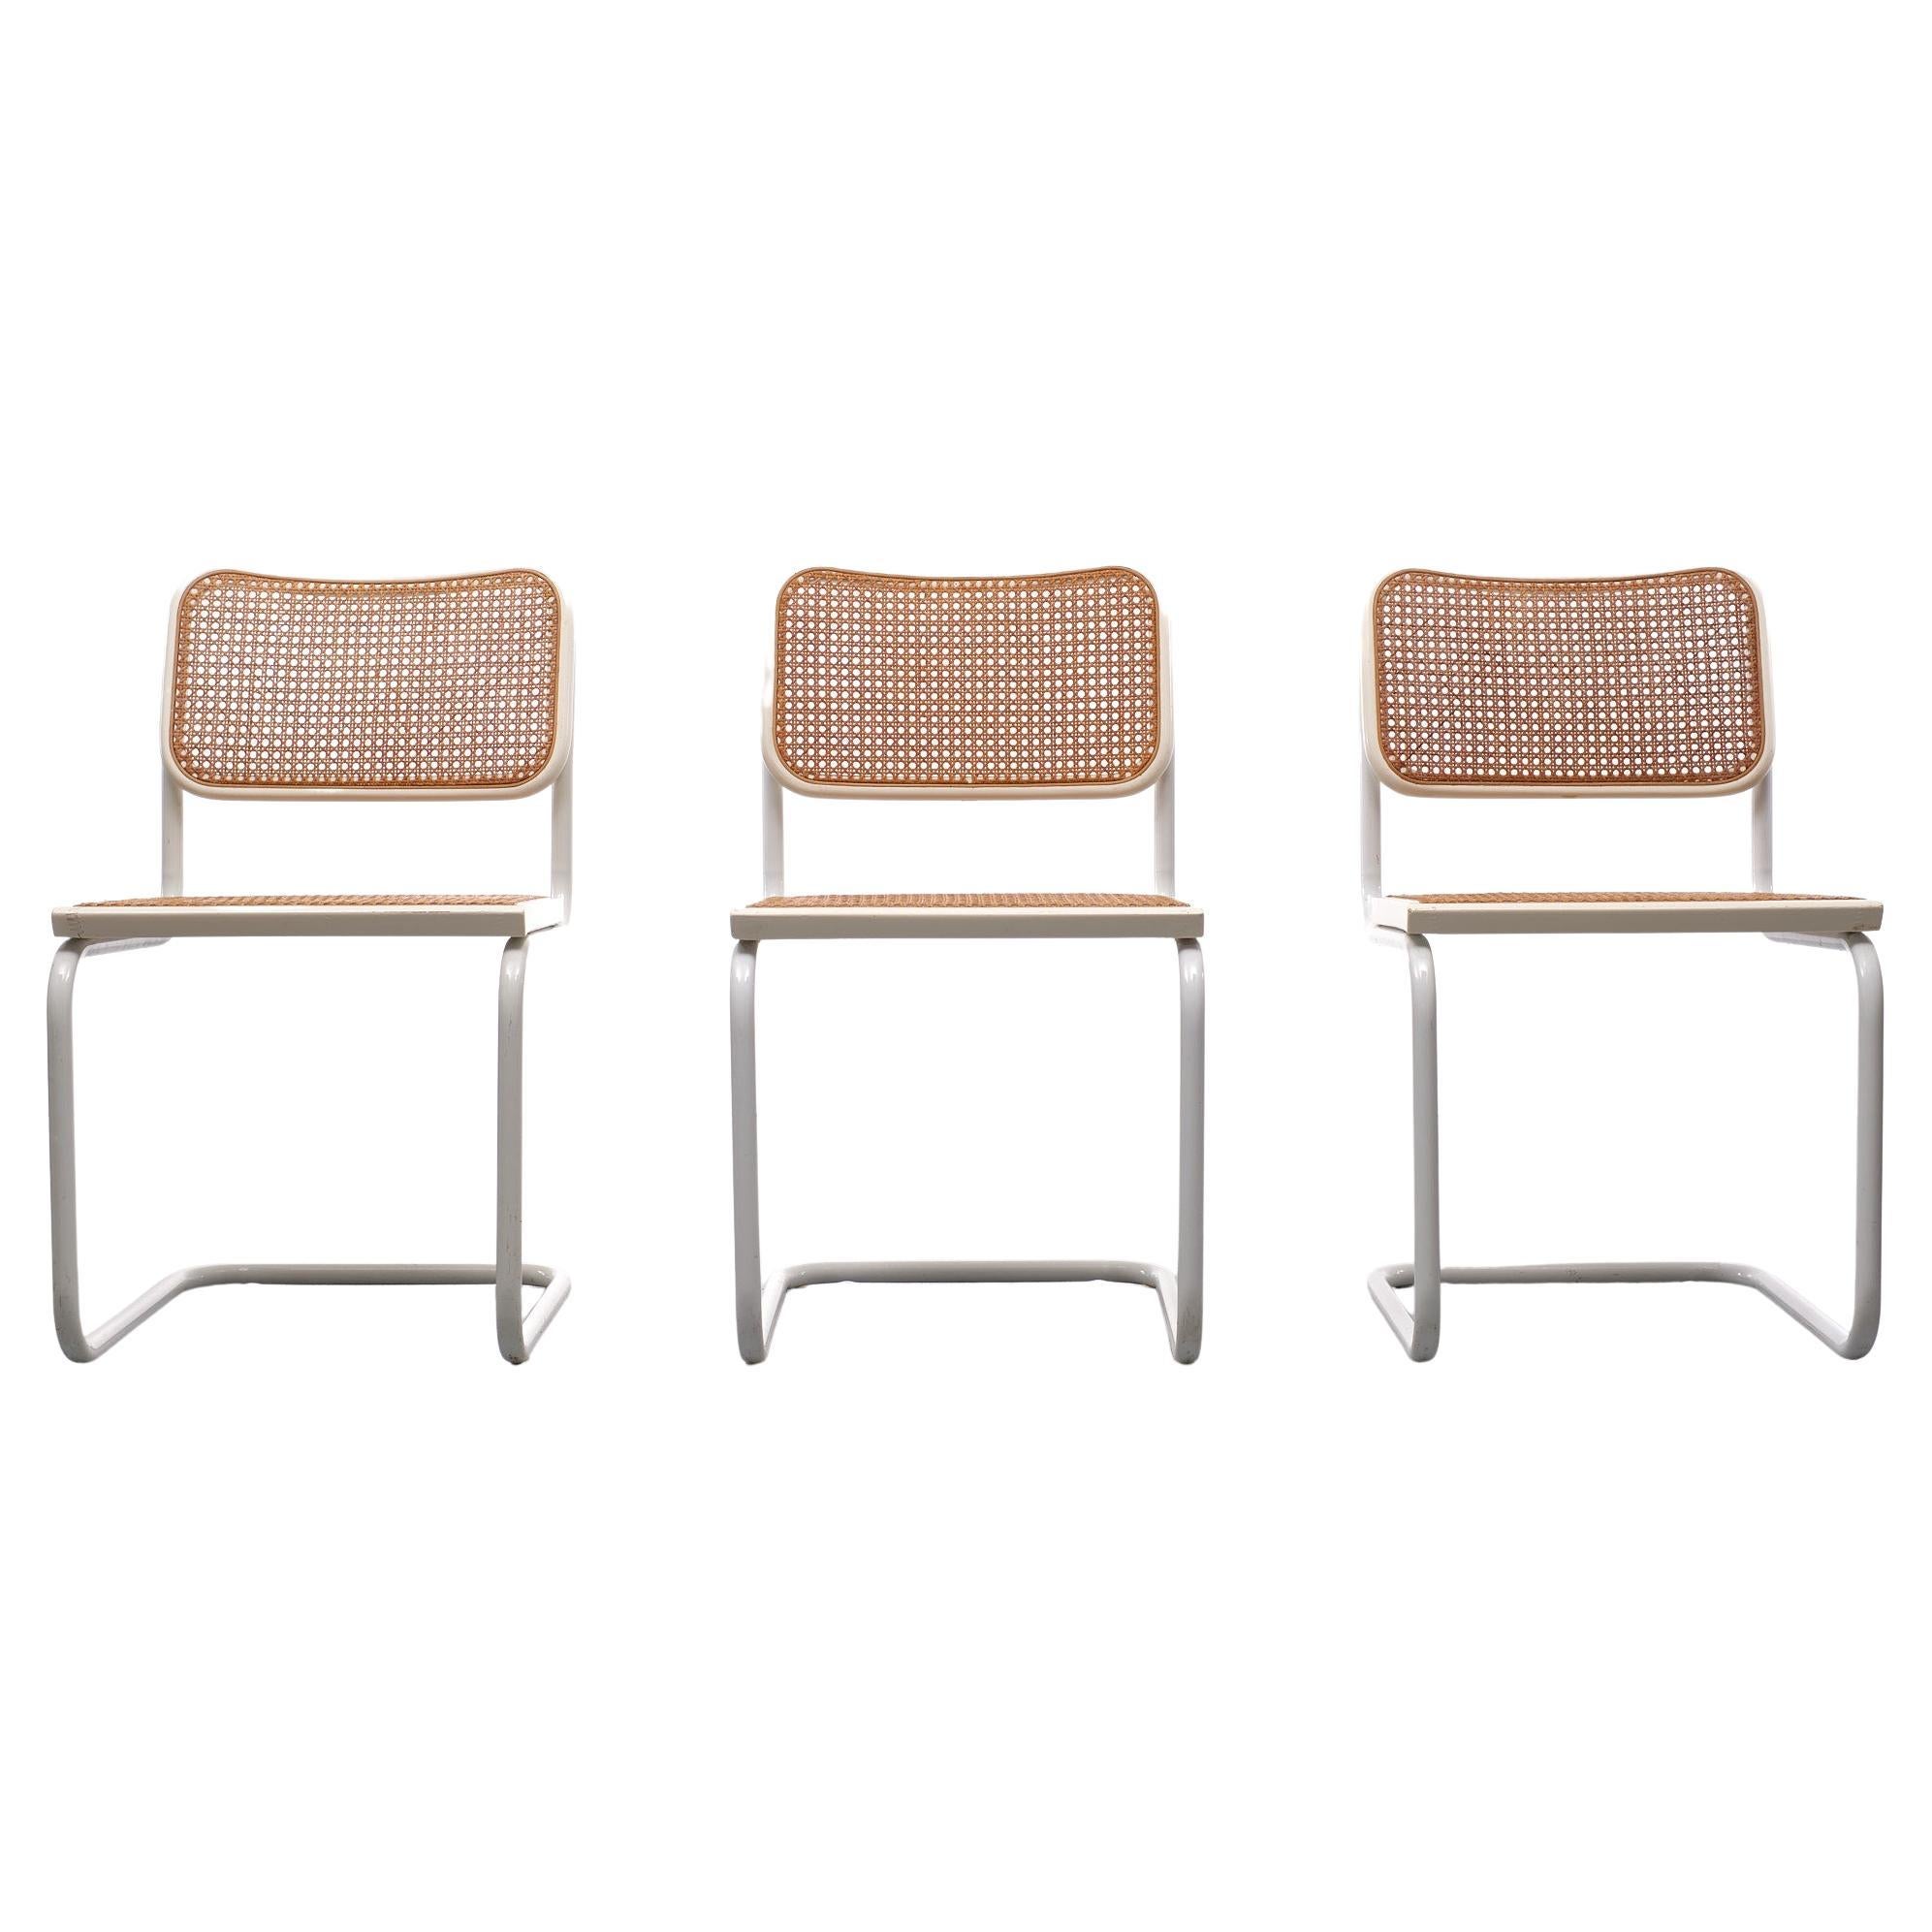 Three B40 cantilever chairs. Original in white, iconic design by marcel breuer these examples are marked ''made in Italy''. 1970s. 
 Good vintage condition. Good seating comfort.
 